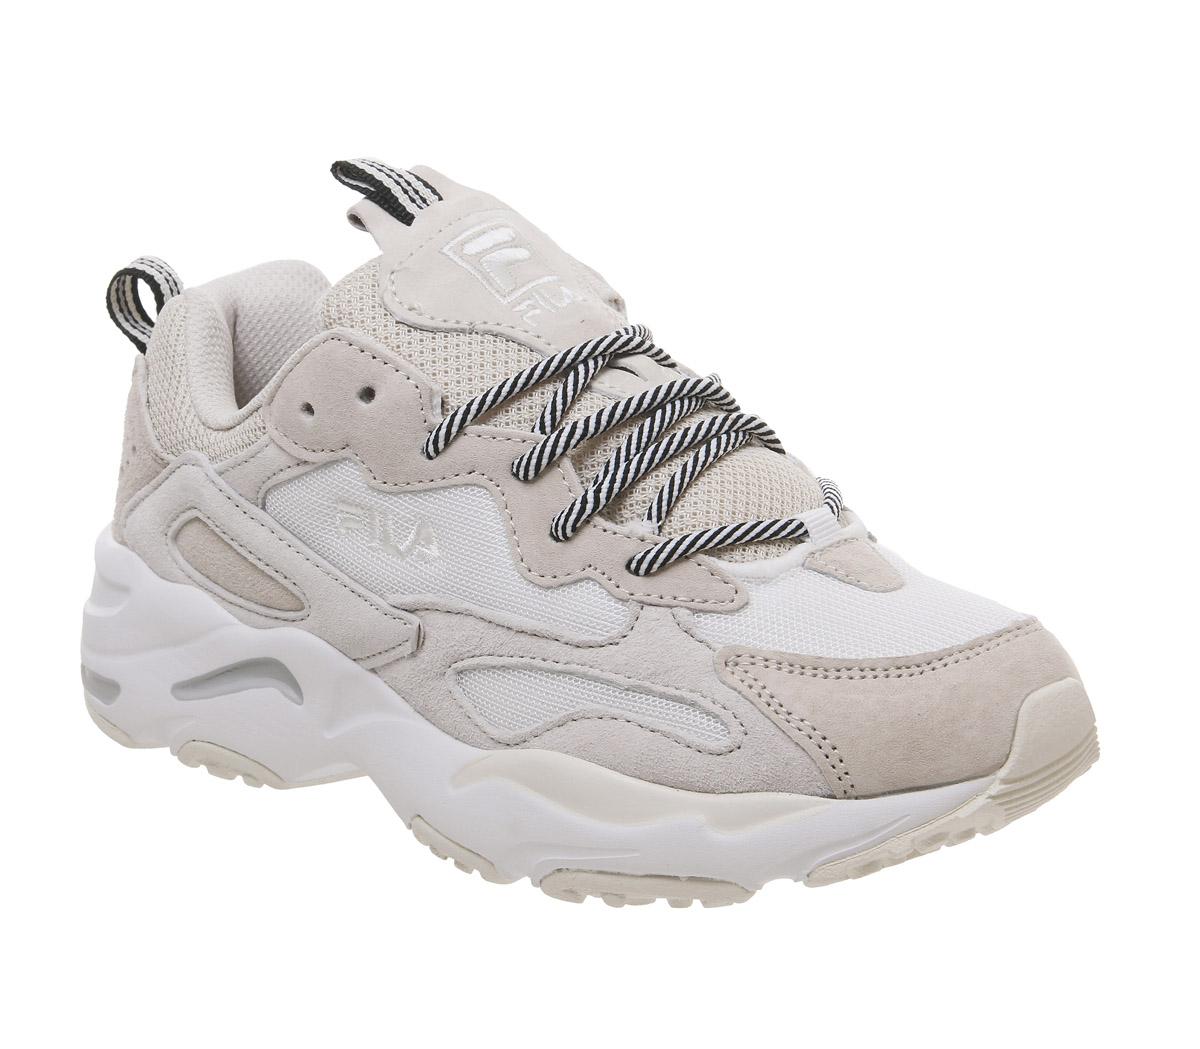 fila tracer whiteLimited Special Sales and Special Offers – Women's Men's Sneakers & Sports Shoes - Shop Athletic Shoes Online > OFF-55% Free Shipping & Fast Shippment!